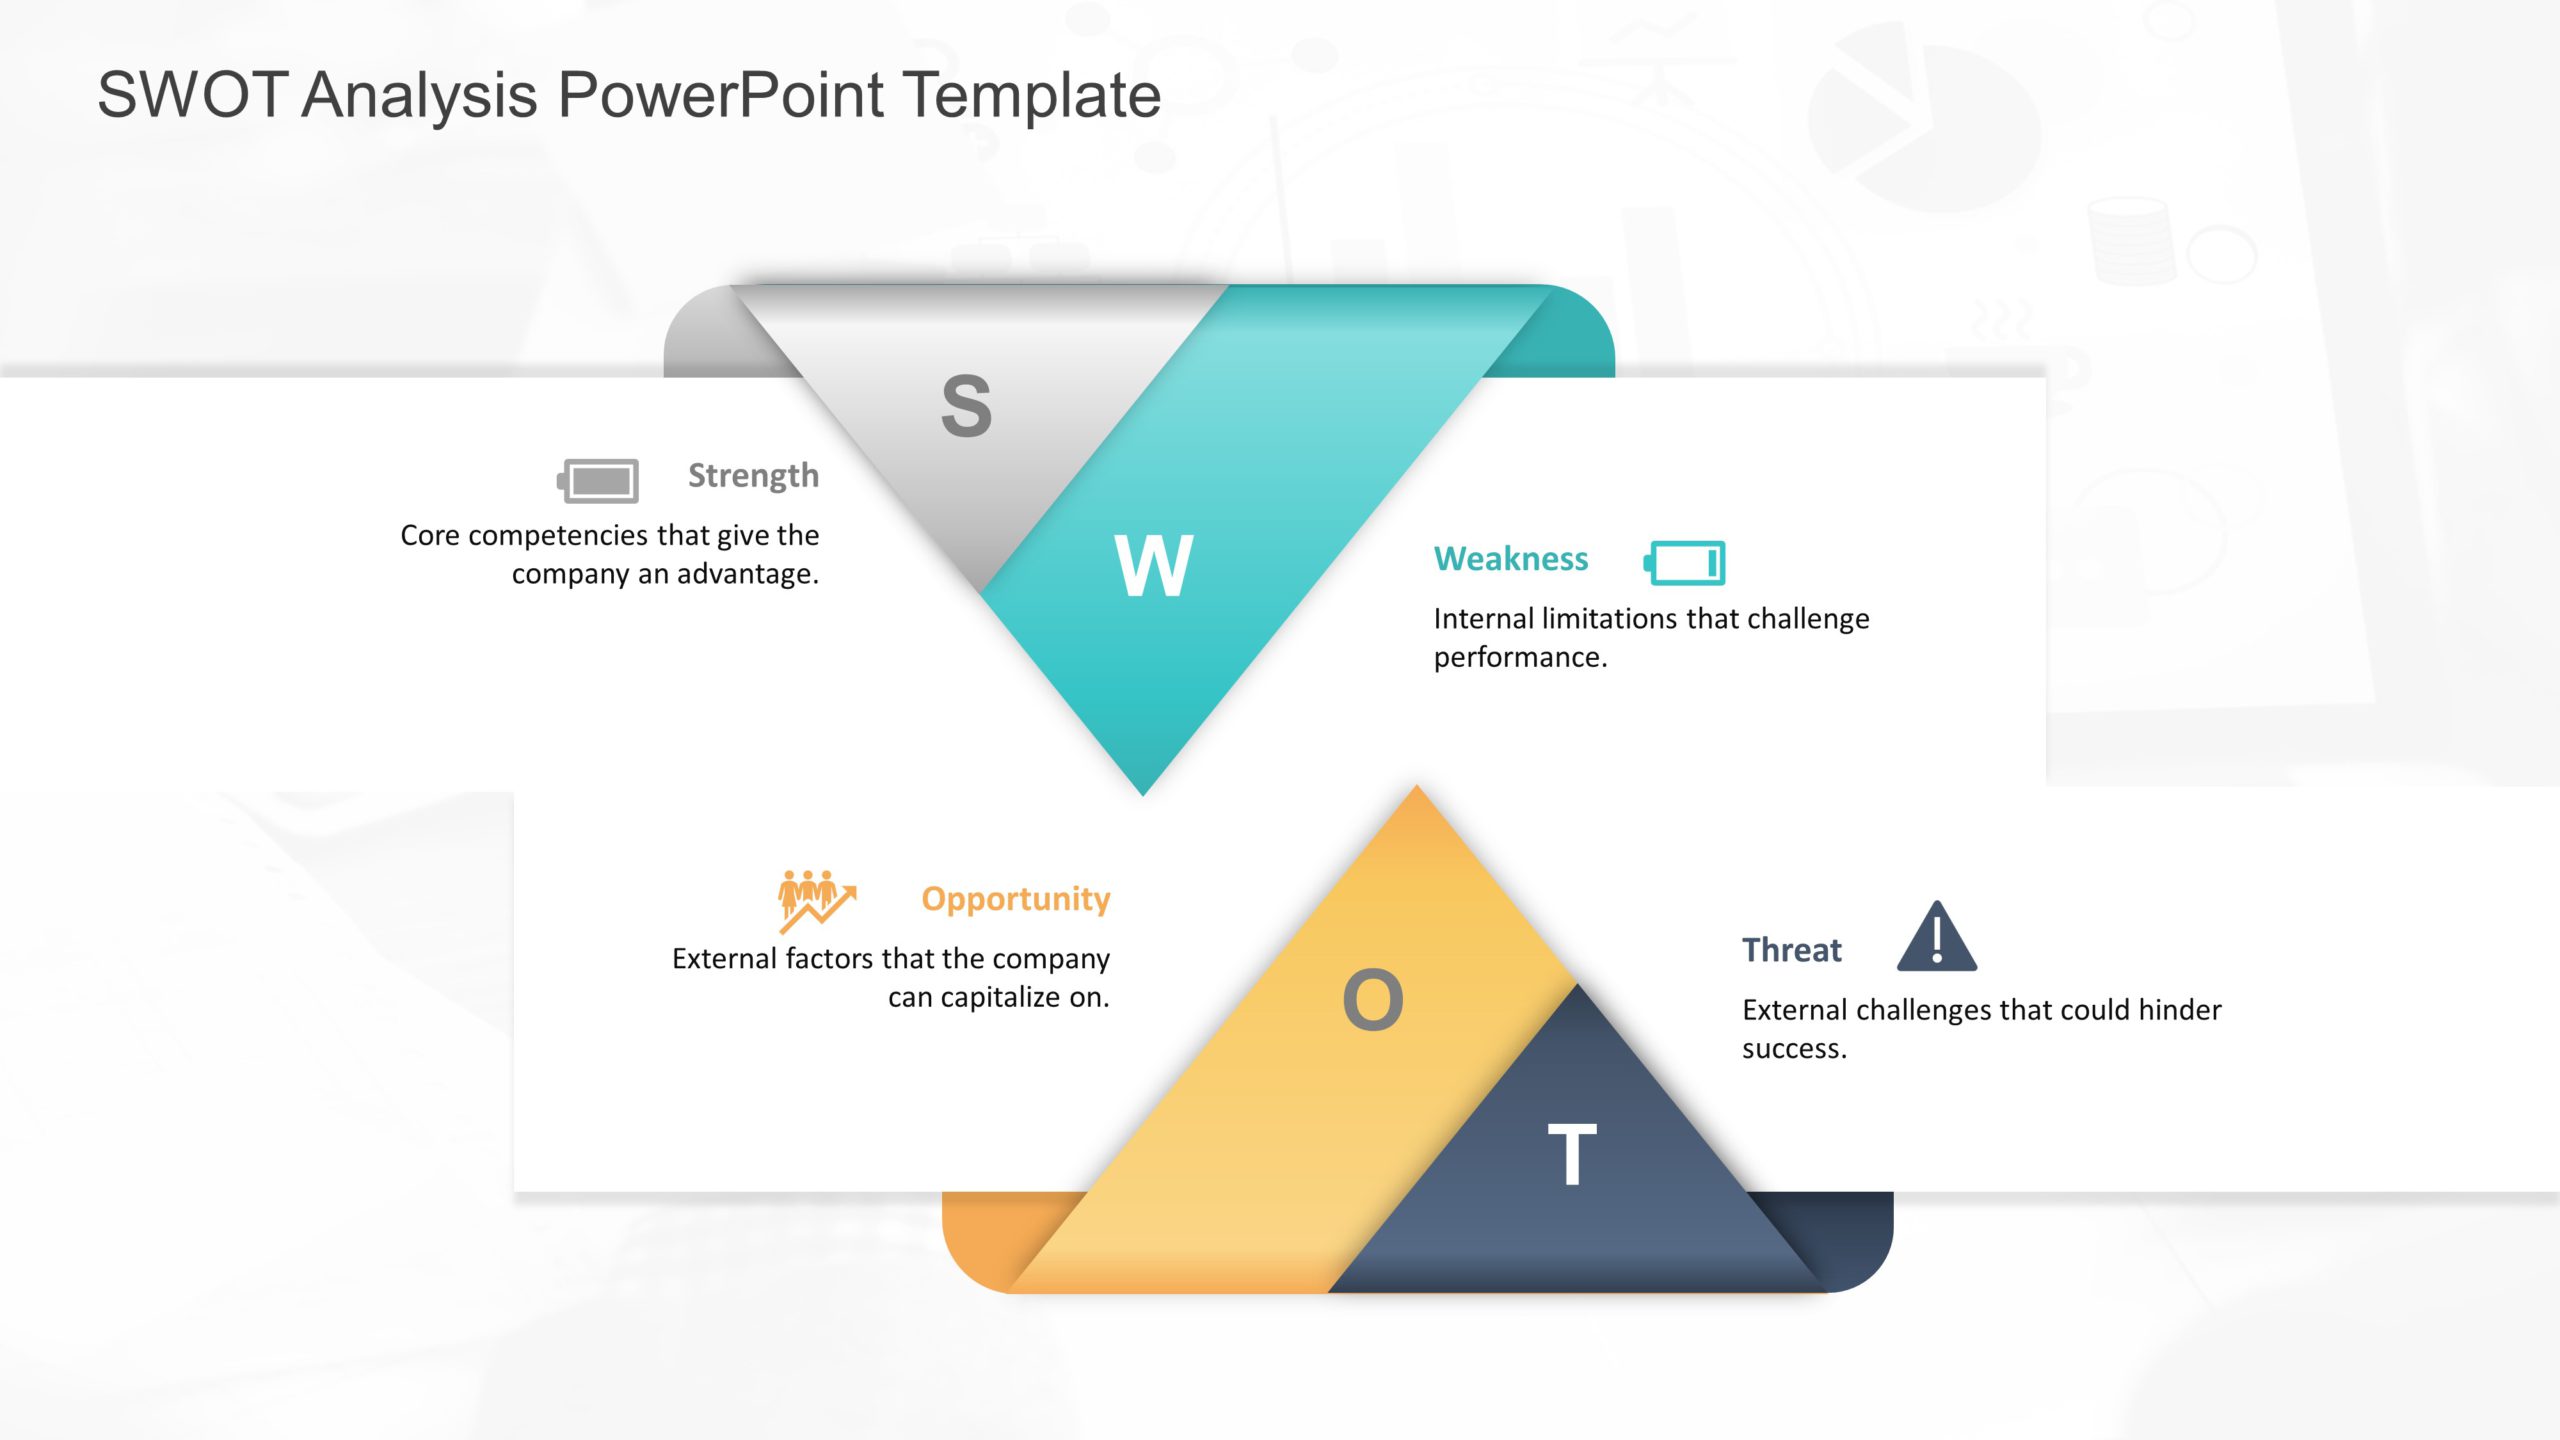 SWOT Analysis PowerPoint Slides Template